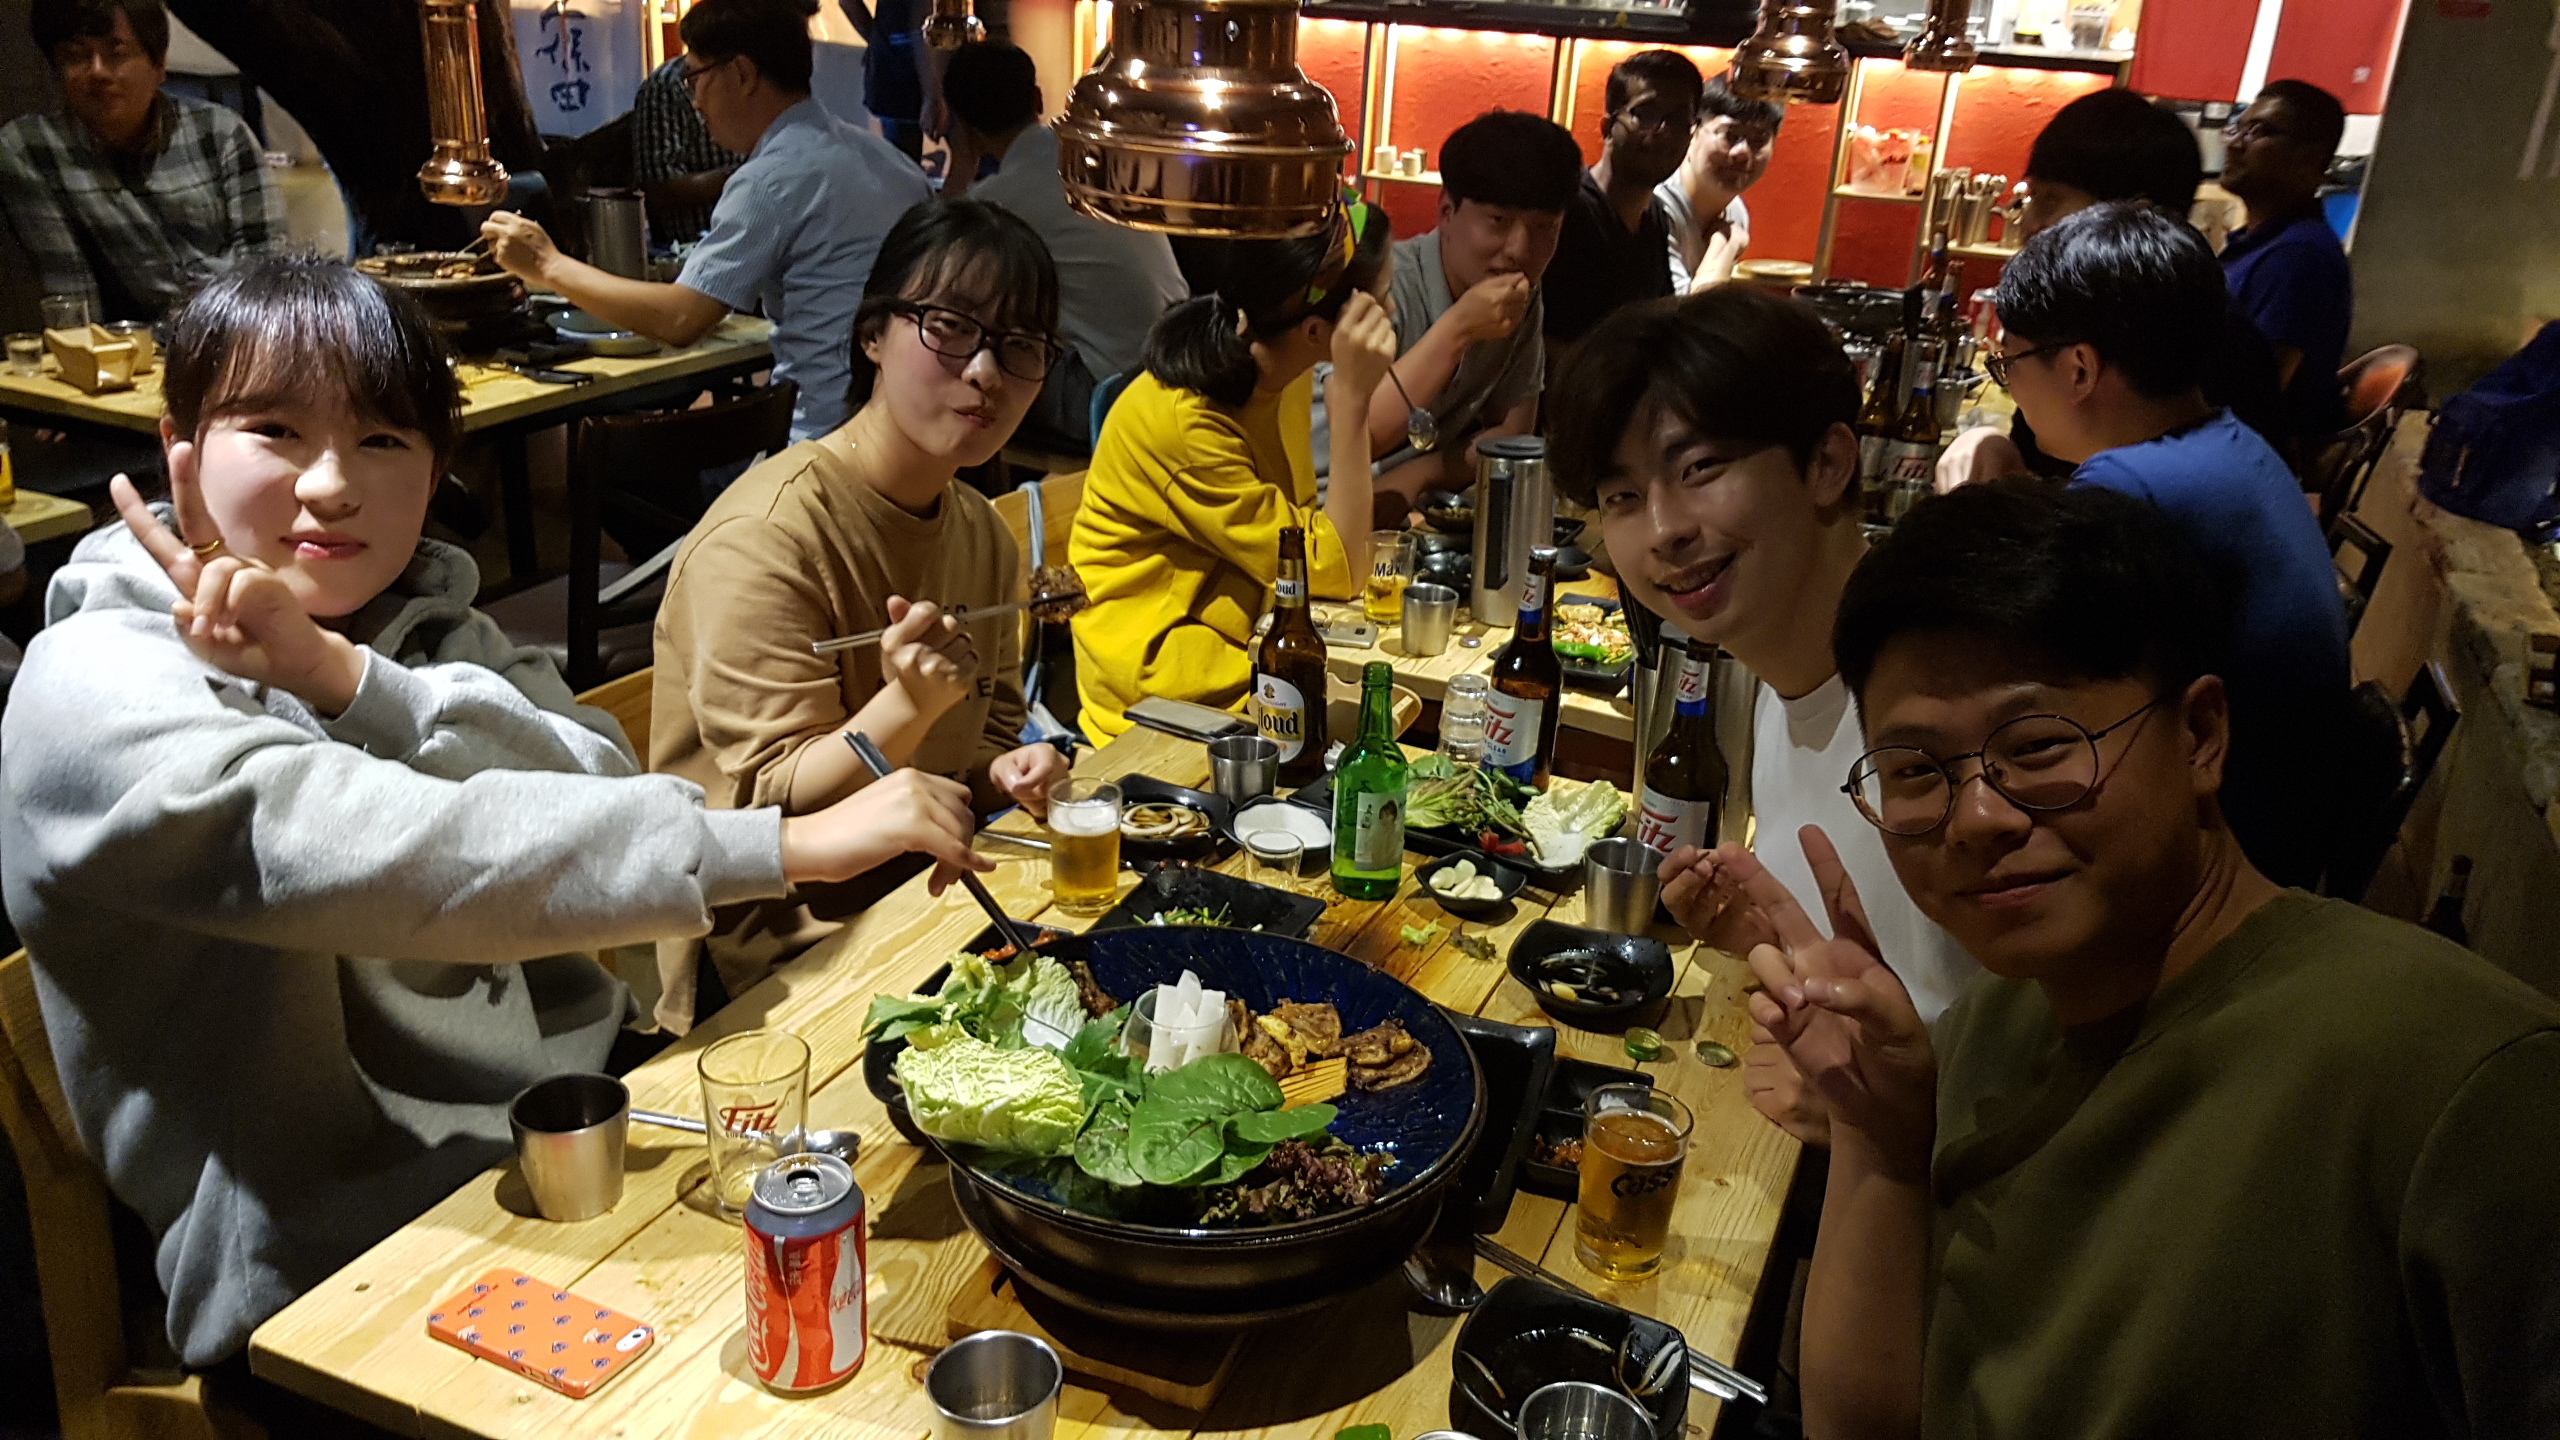 Welcome dinner for new lab members, Sep 7, somewhere in Seomyun area 20170907_202242.jpg